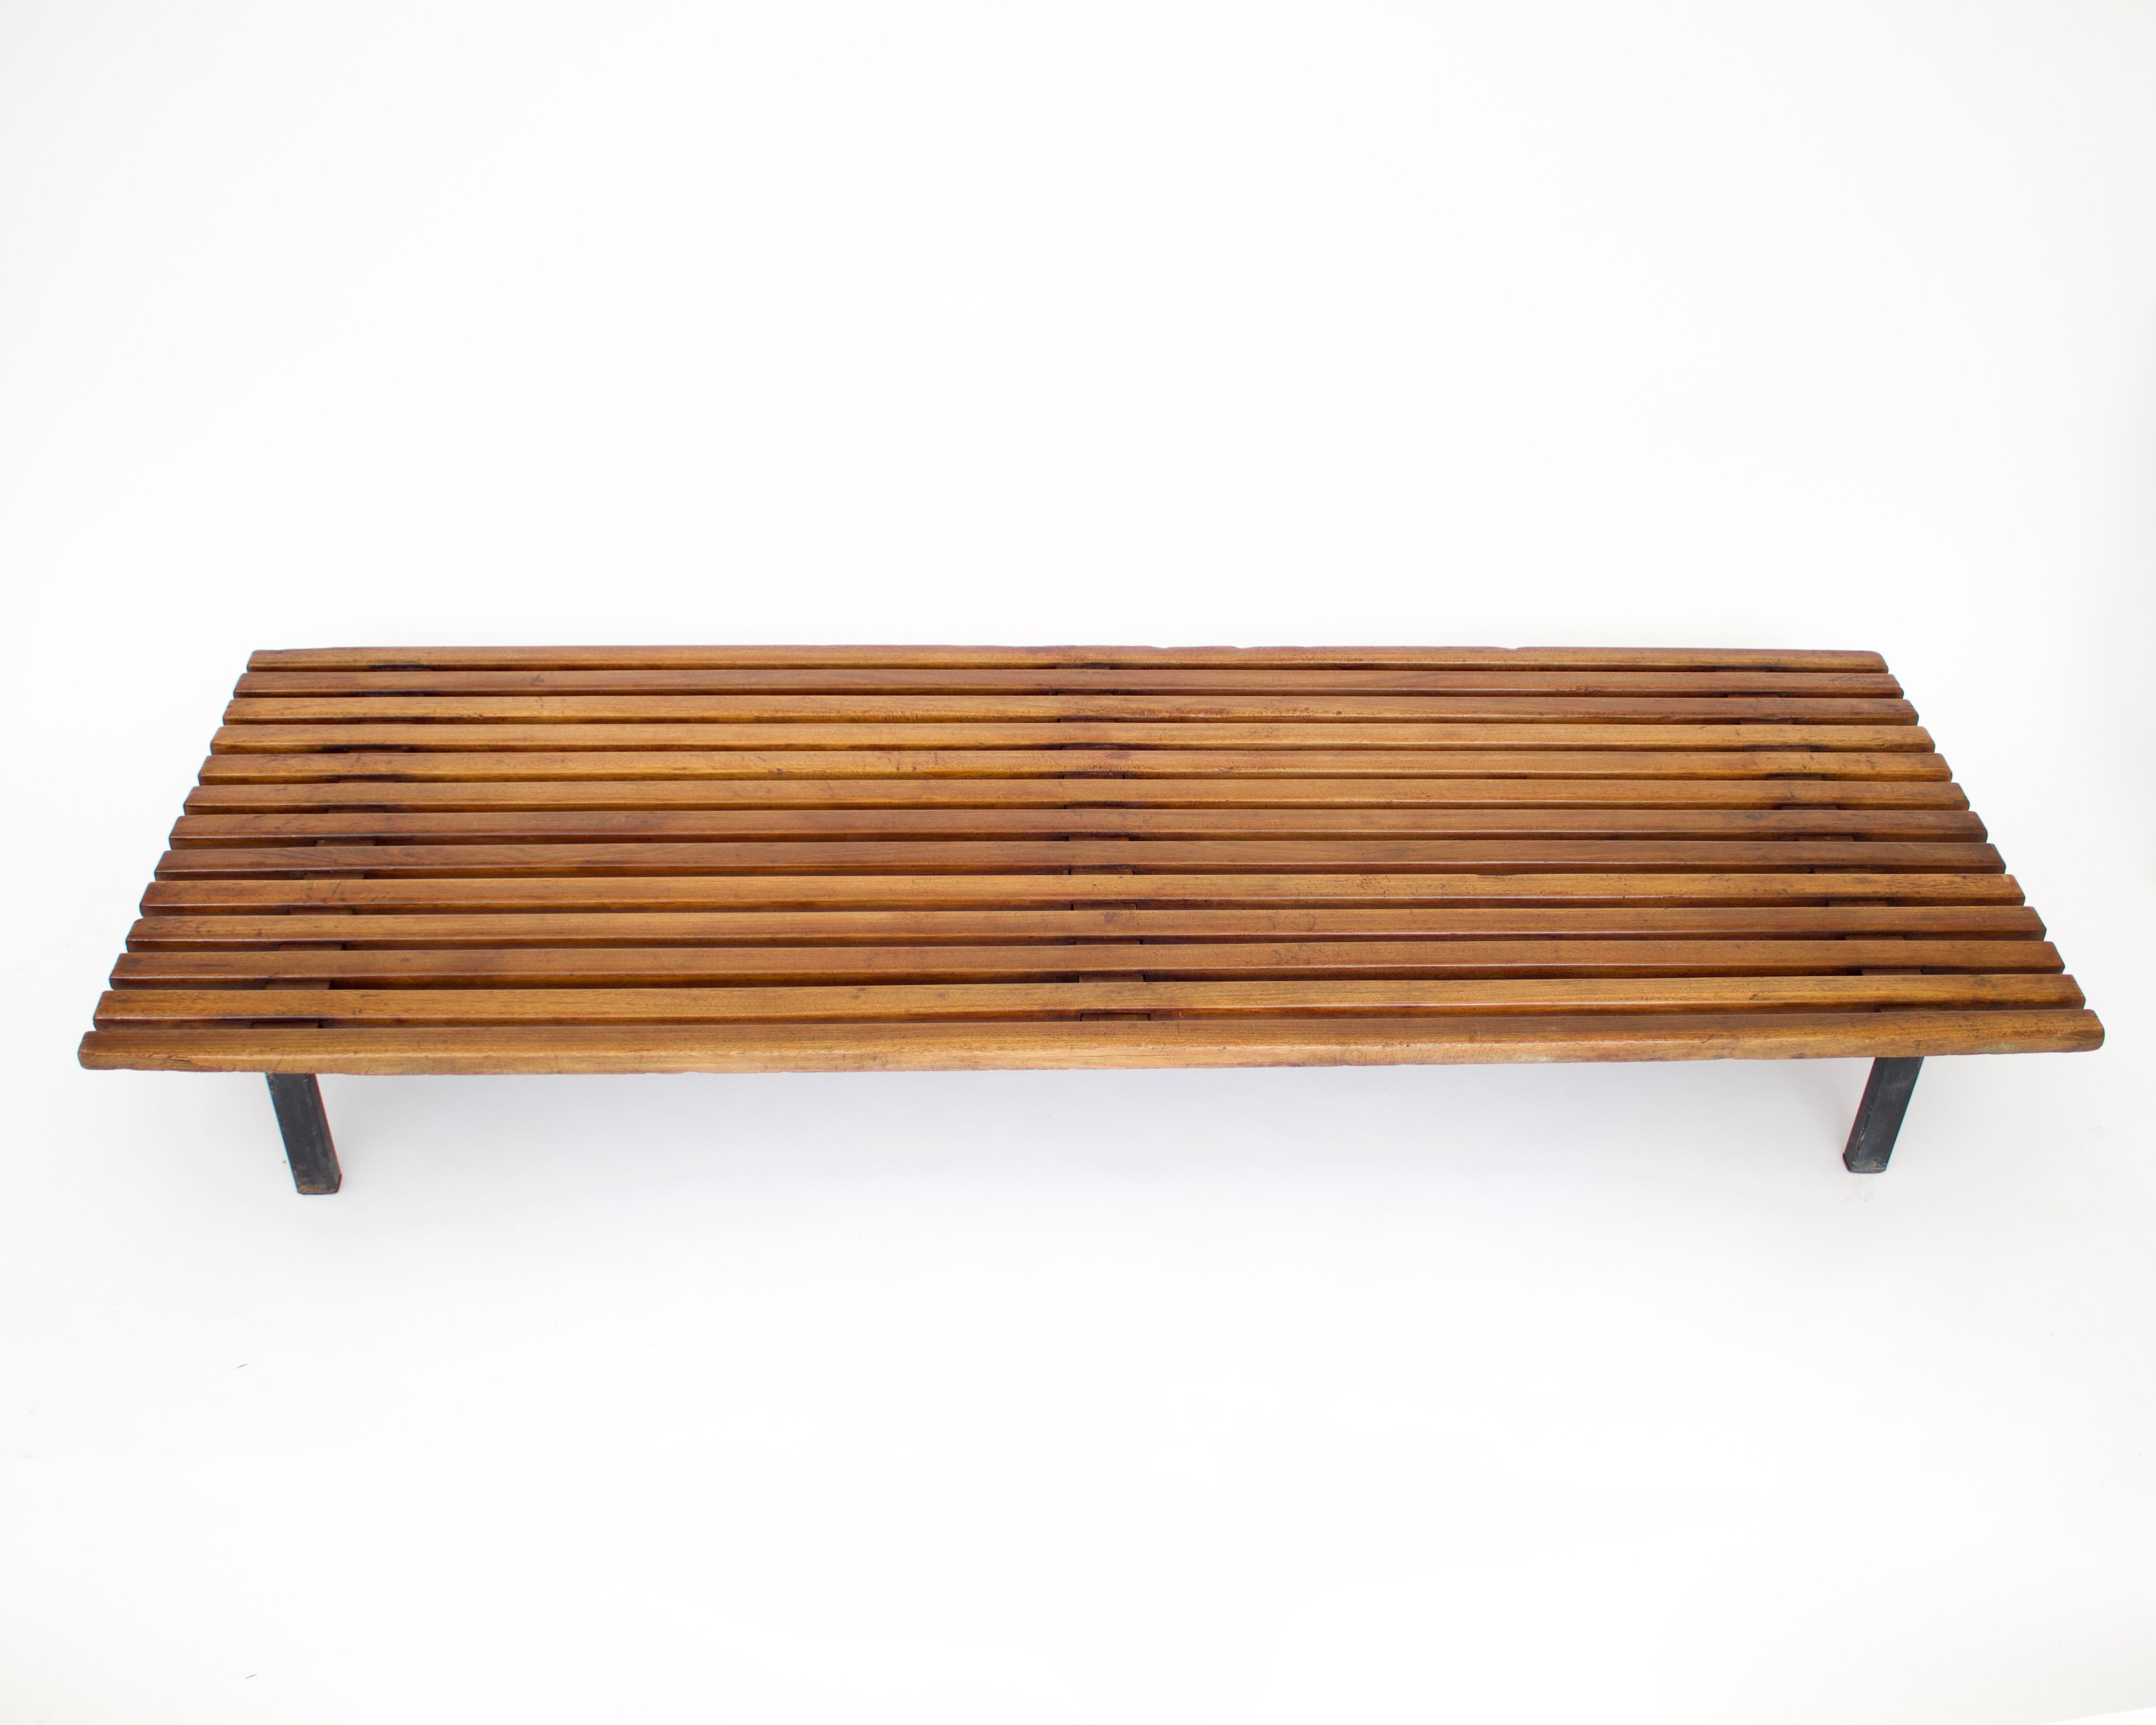 Bench designed by Charlotte Perriand, circa 1950. Manufactured by Steph Simon (France), circa 1950. 
Mahogany wood, lacquered metal frame and legs. 
Provenance: Cansado, Mauritania (Africa).
In original condition, with minor wear consistent with age